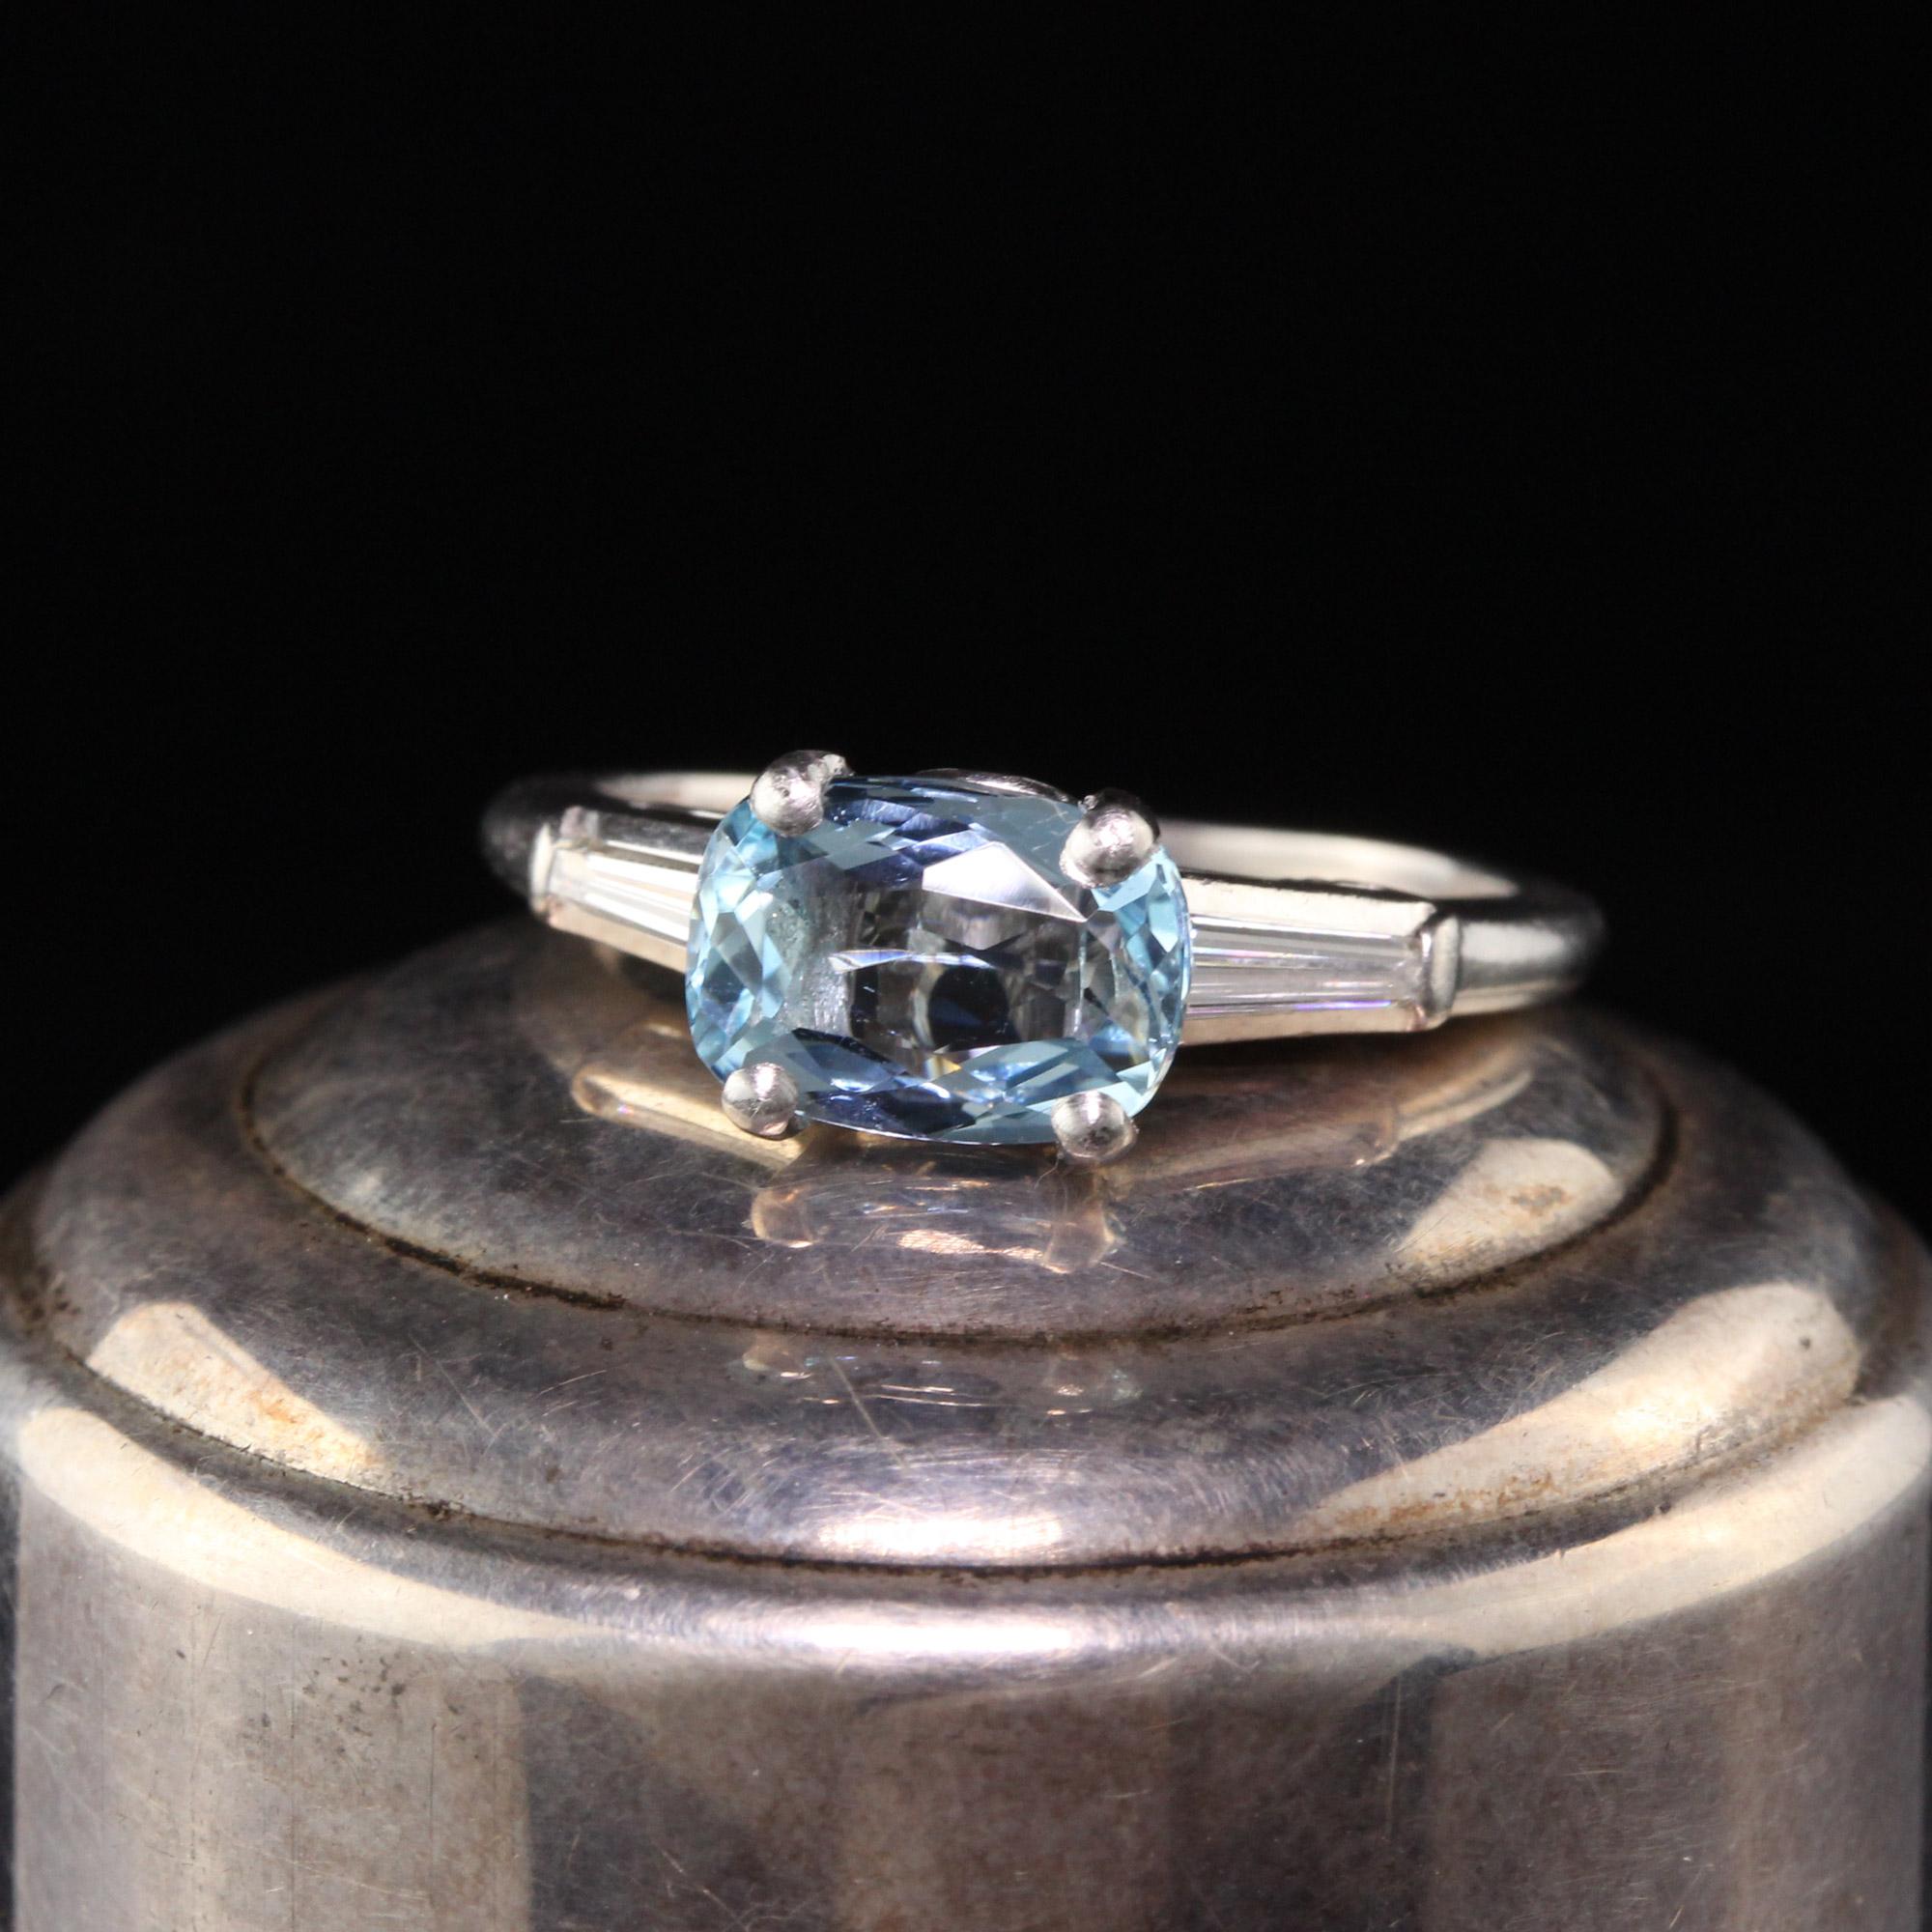 Gorgeous Antique Art Deco Platinum Diamond and Aquamarine Engagement Ring. This beautiful ring has a 1.30 ct aquamarine in the center flanked by two tapered baguettes weighing .40 ct total. 

Item #R0708

Metal: Platinum

Weight: 4.2 Grams

Total